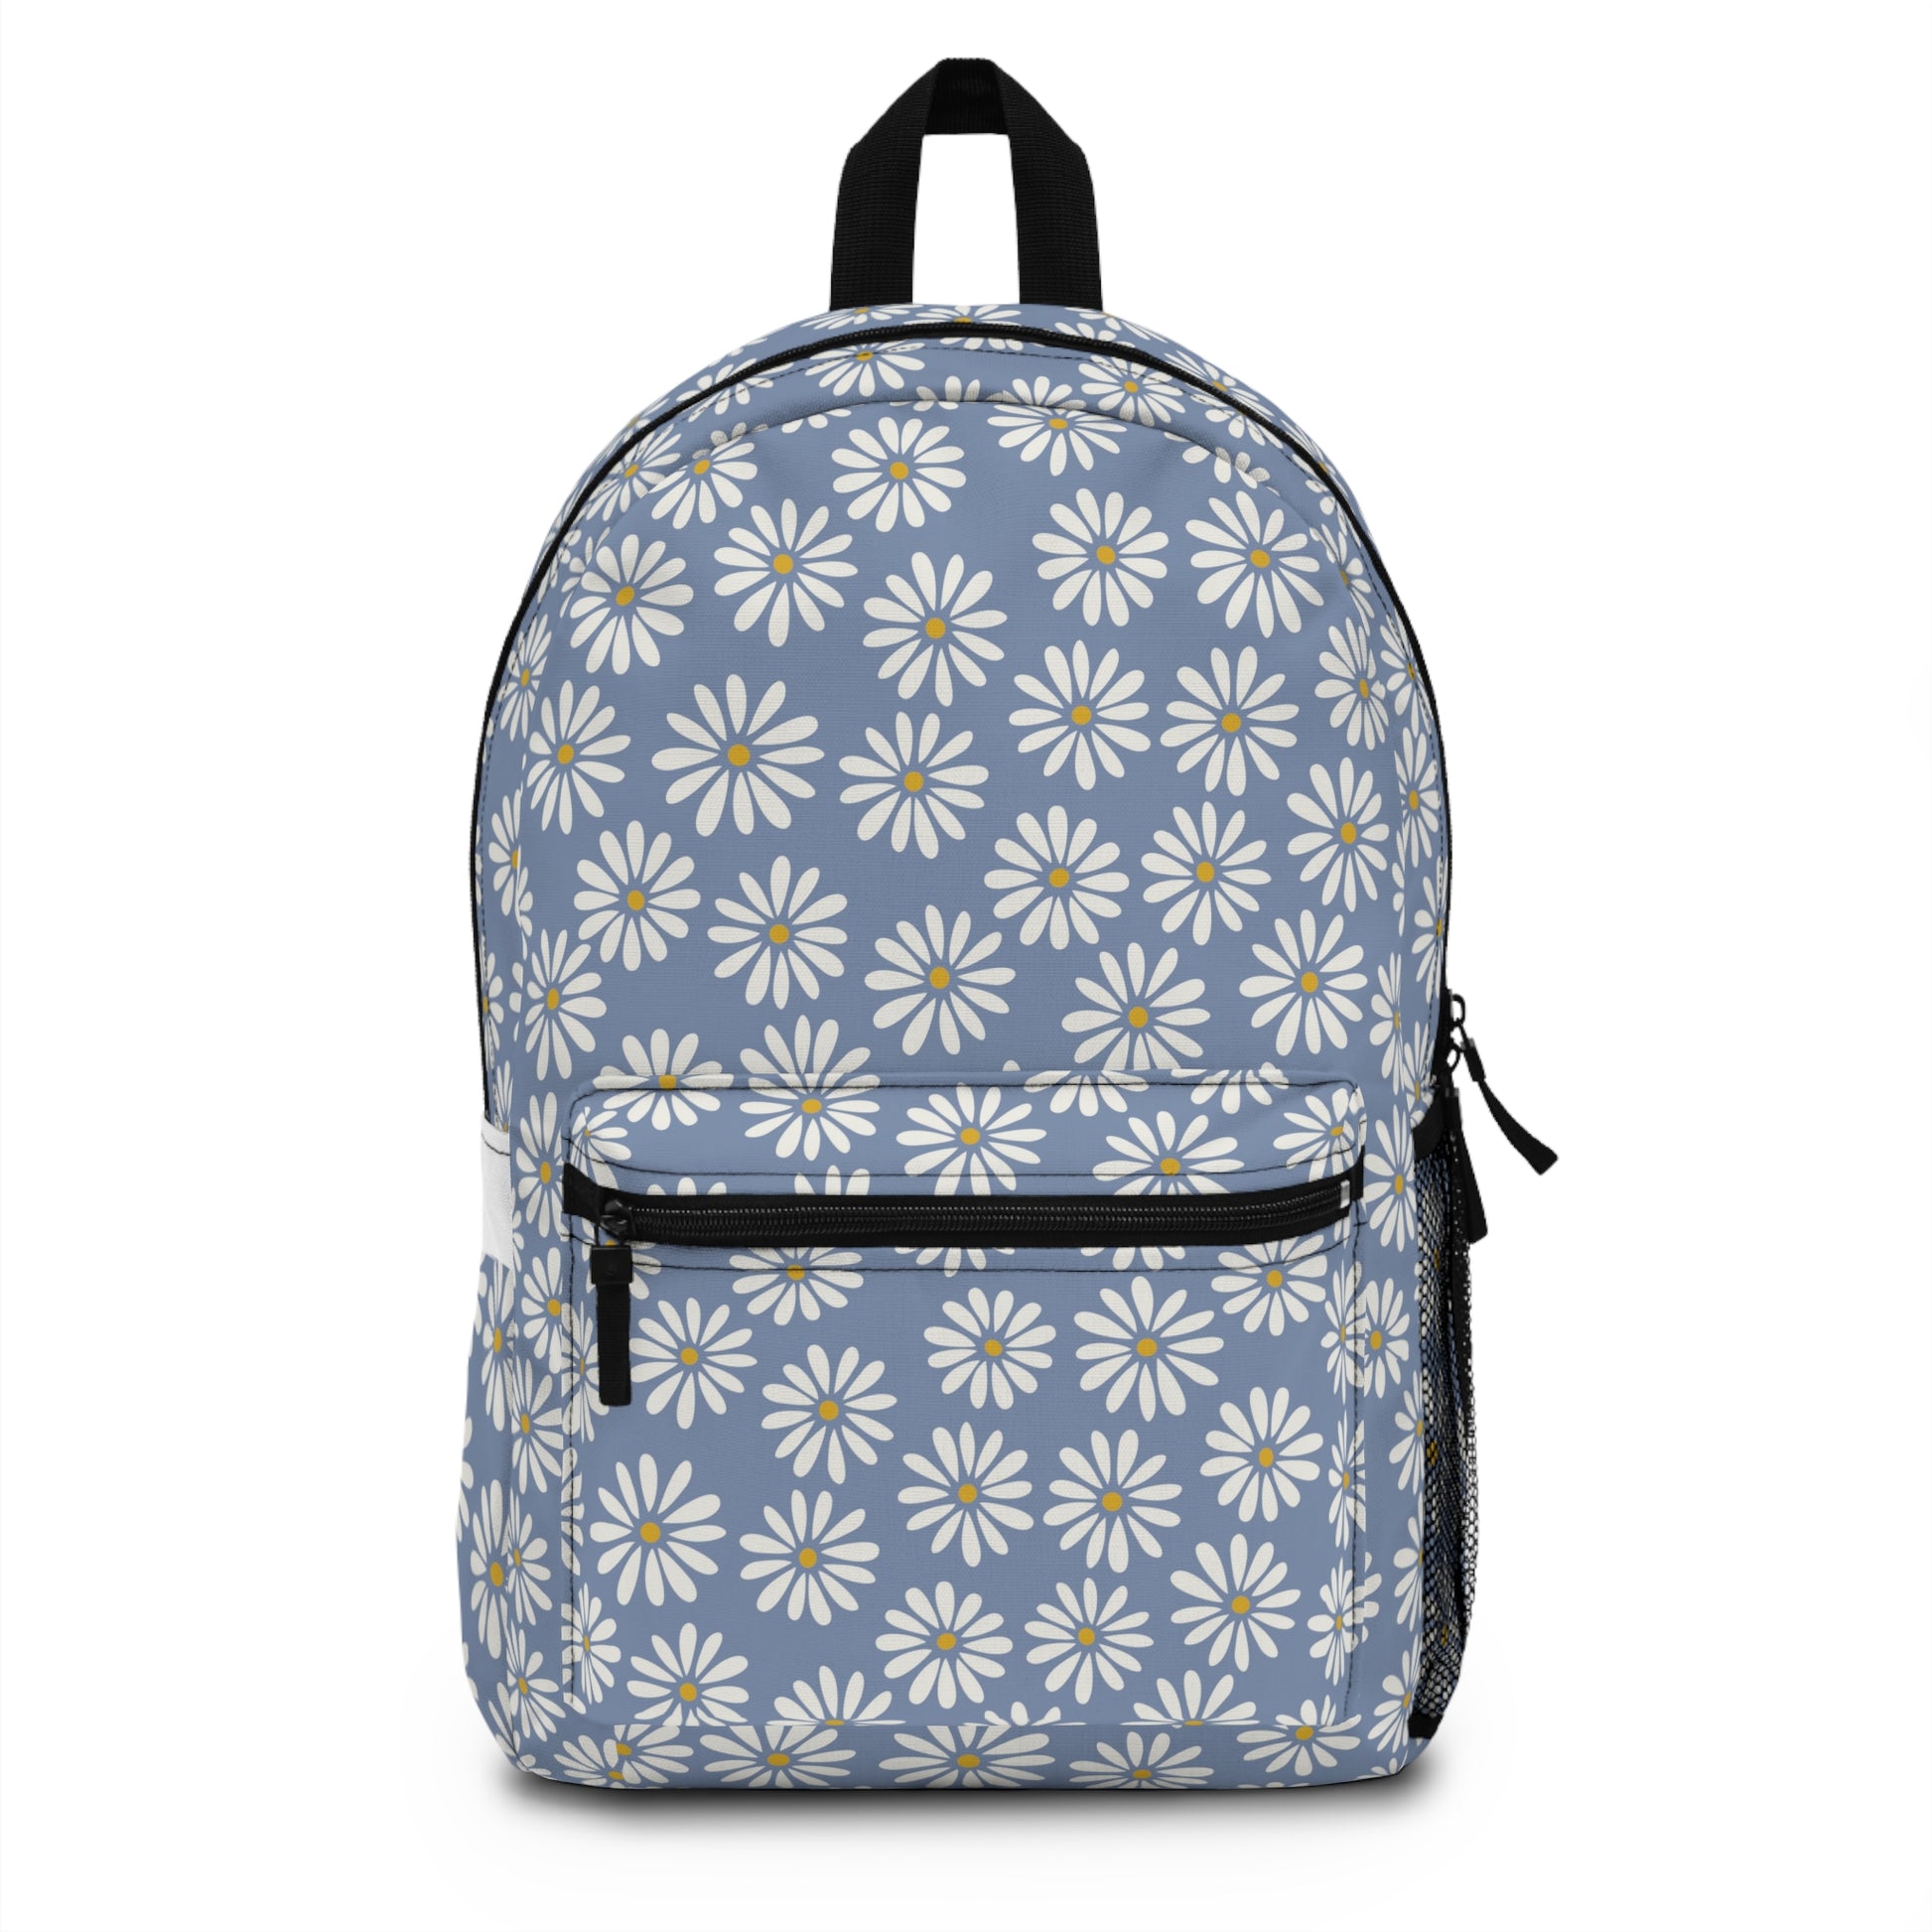 blue daisy backpack for girls back to school